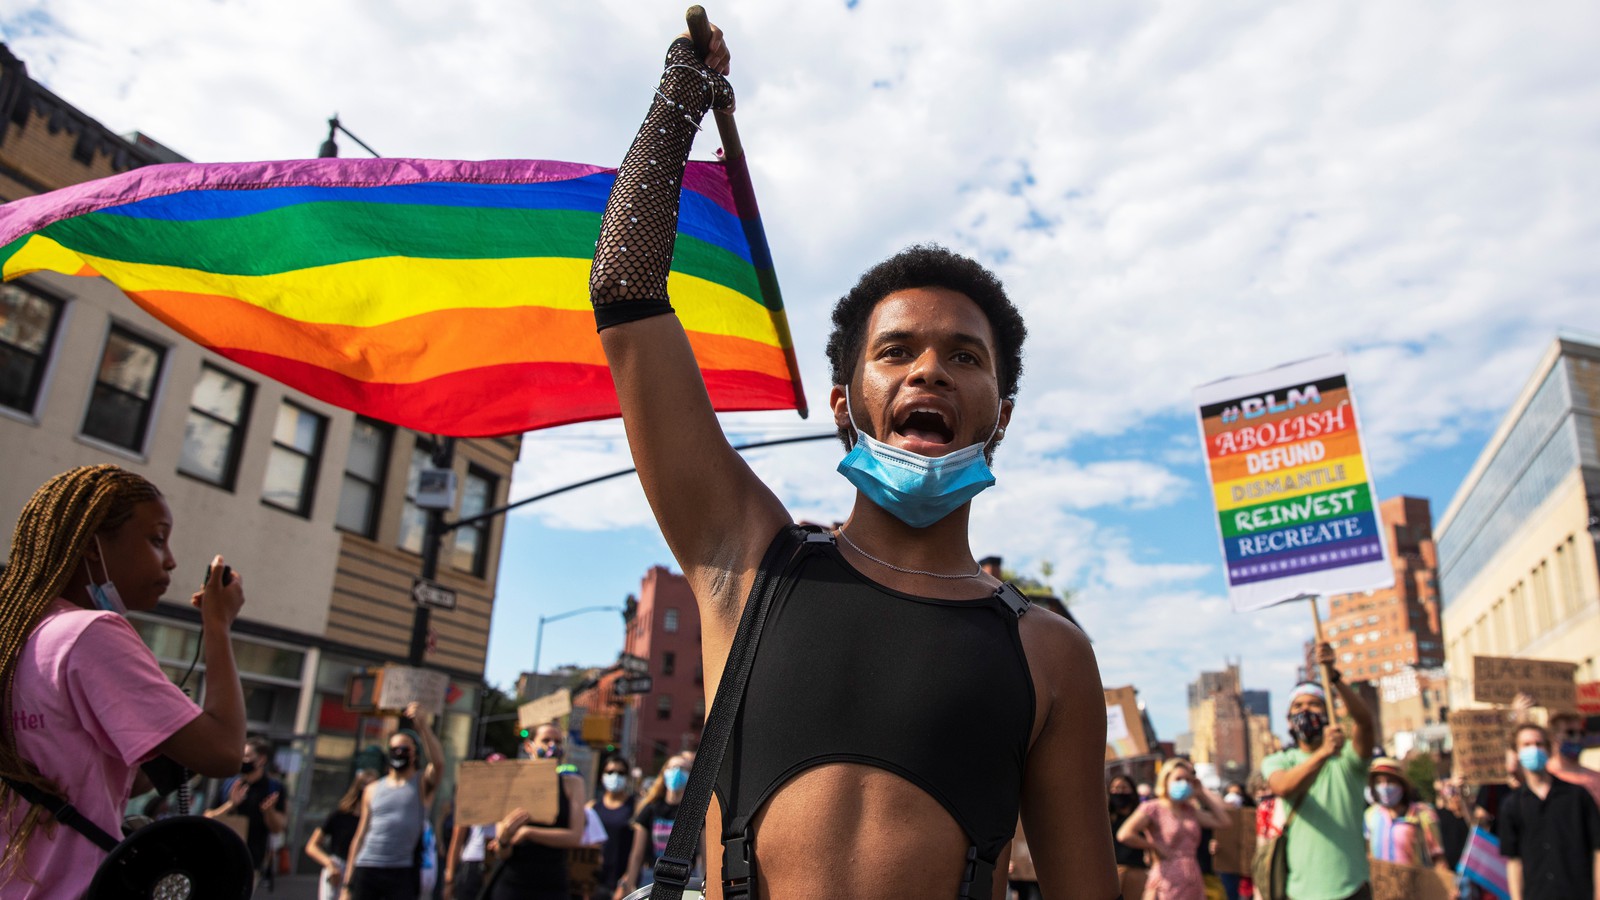 A Black person in a black crop top is holding a rainbow flag. They are in front of a parade.